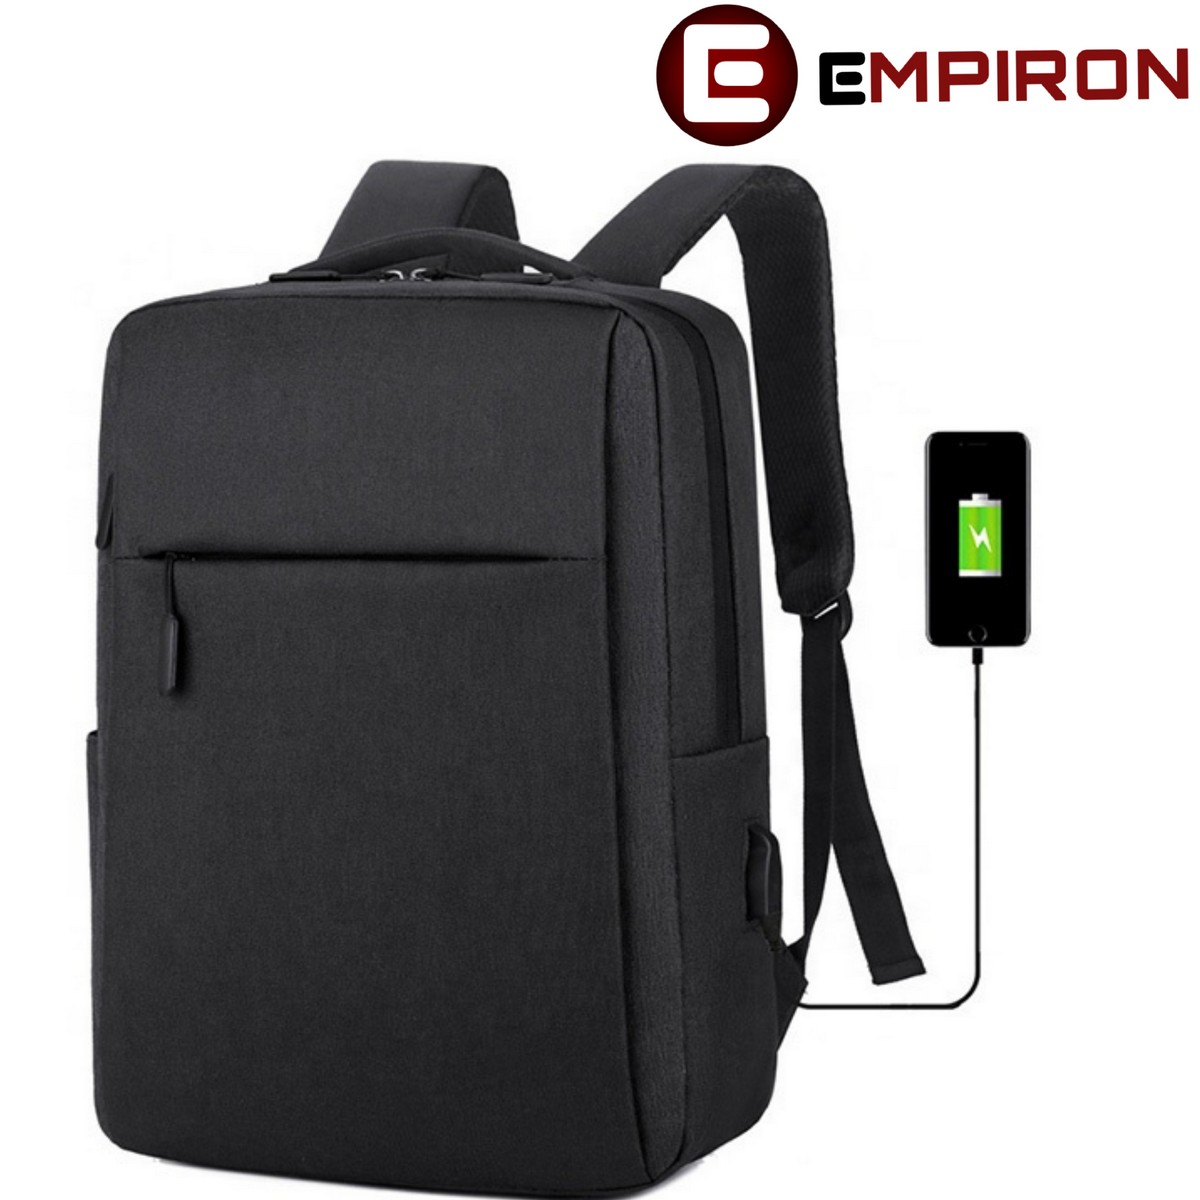 EMPIRON Usb Charging Backpack Laptop Bag Water Resistant Business Computer Backpack Bag / Backpacks For Boys / Backpacks for Men / Bags for boys For Upto 15.6 Inch Laptop with USB Port ELBUF03